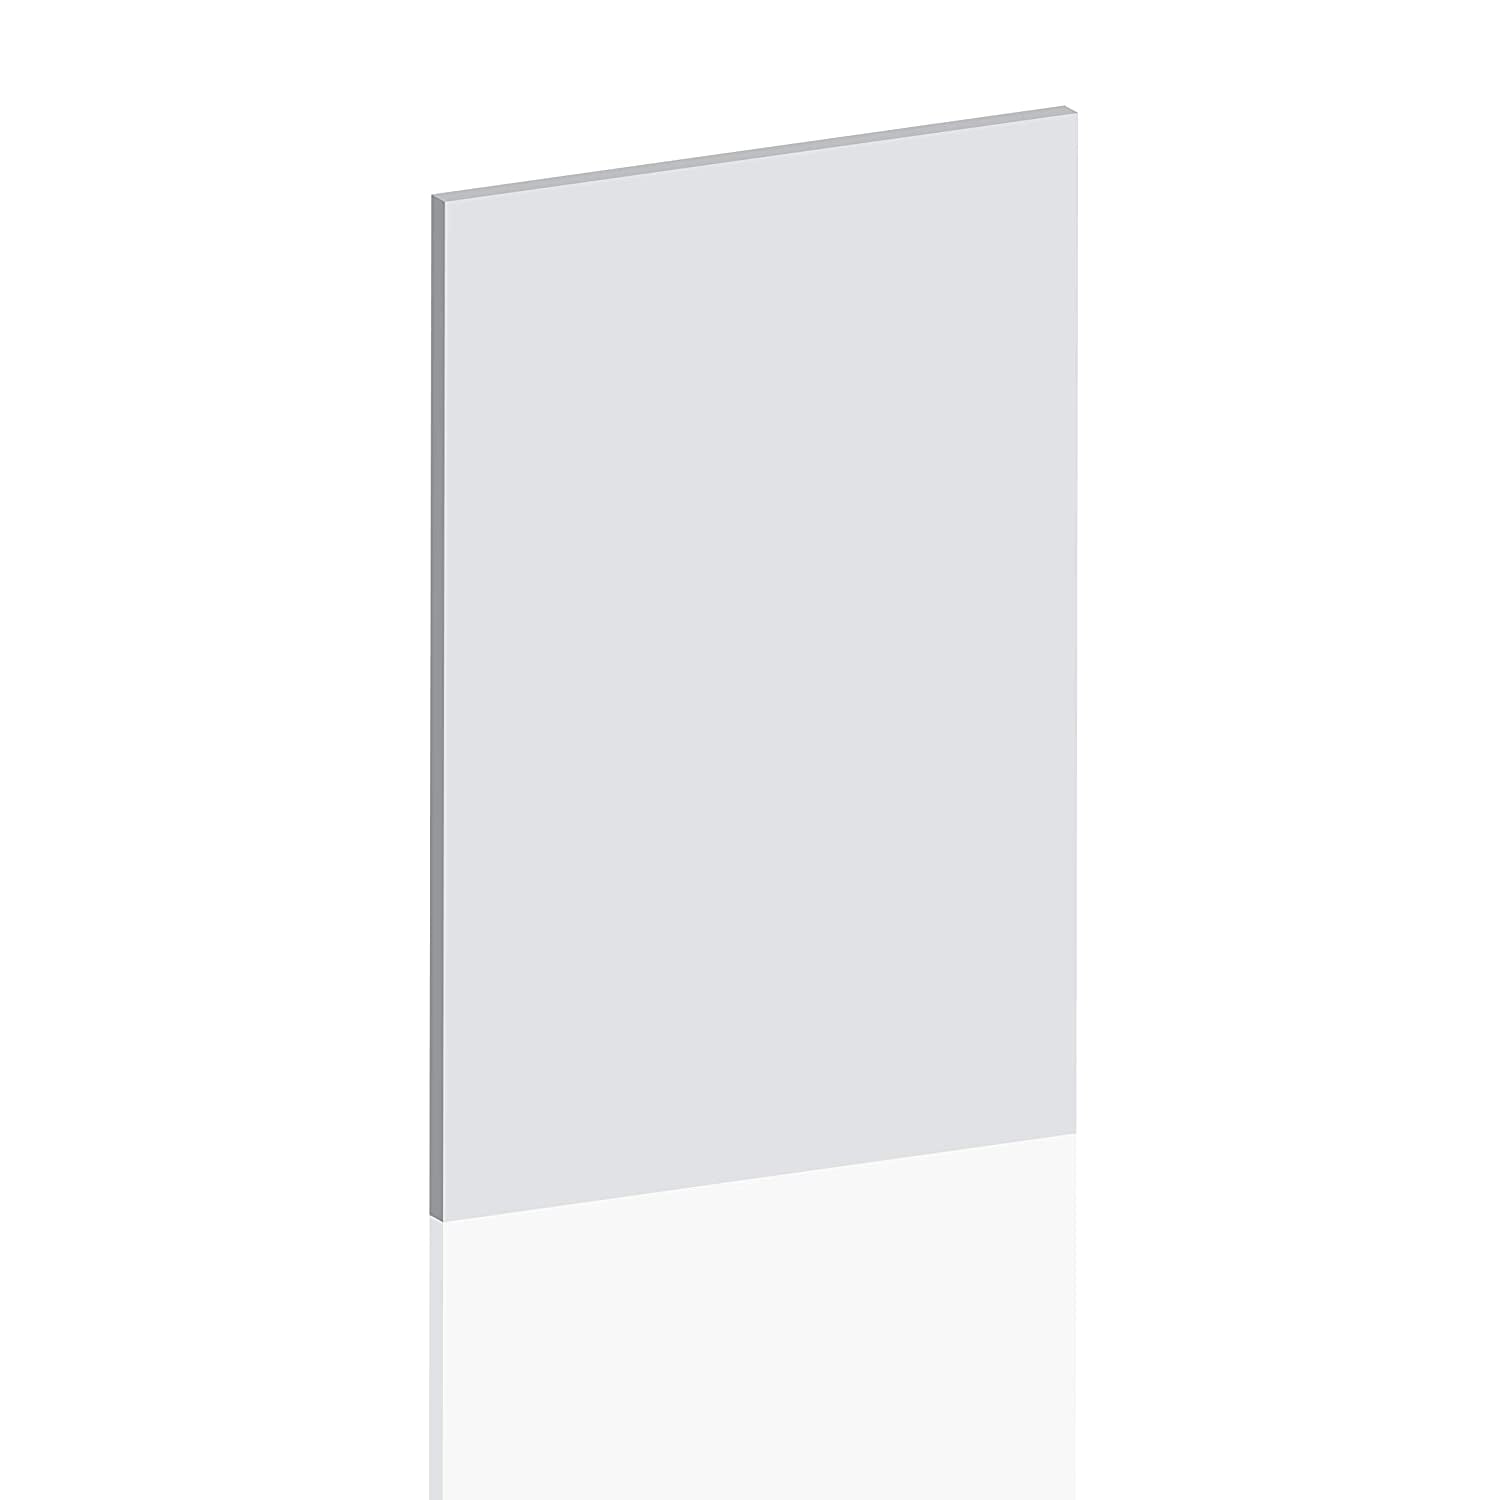 0.984 (1 inch) x 24 x 48 (3 Pack), PVC Expanded Plastic Sheet, White